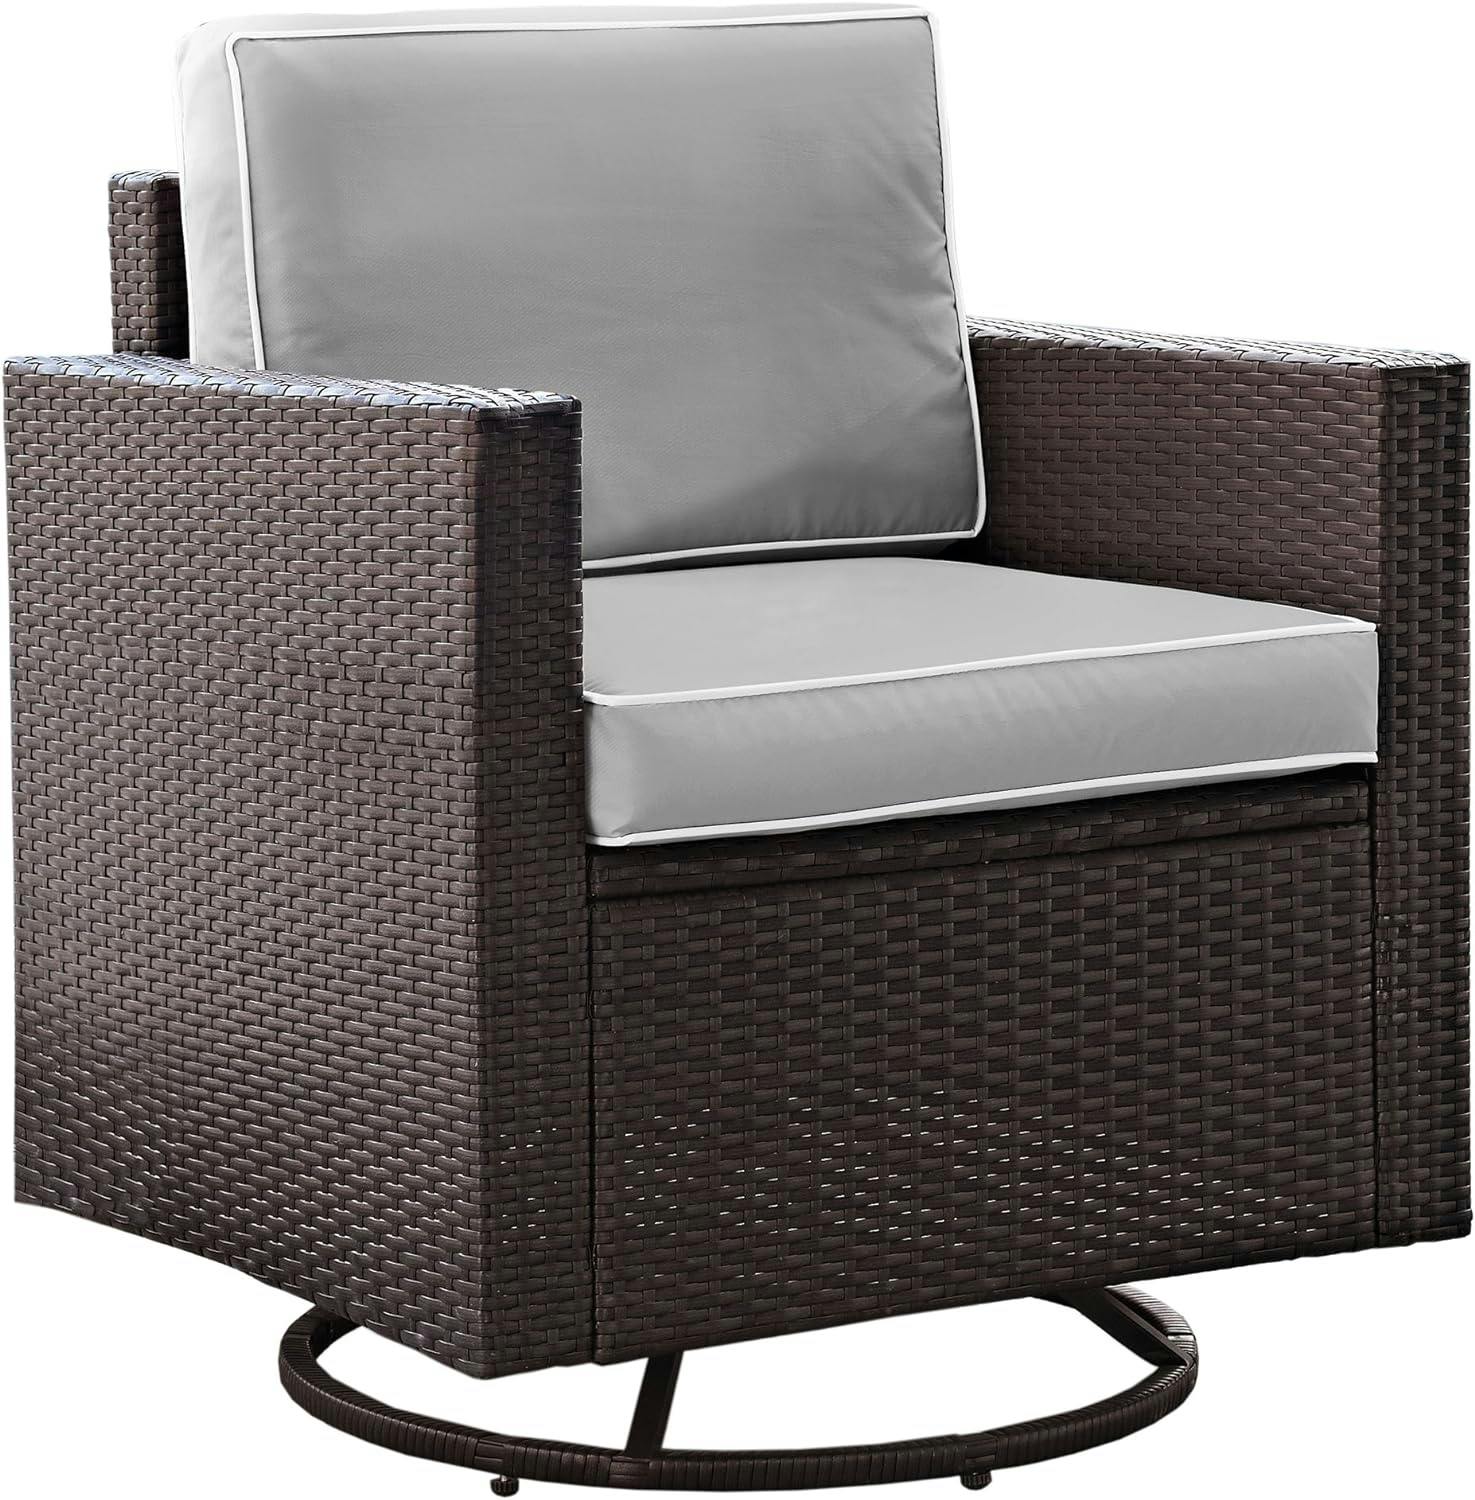 Palm Harbor Modern Outdoor Wicker Swivel Rocker Chair with Gray Cushions